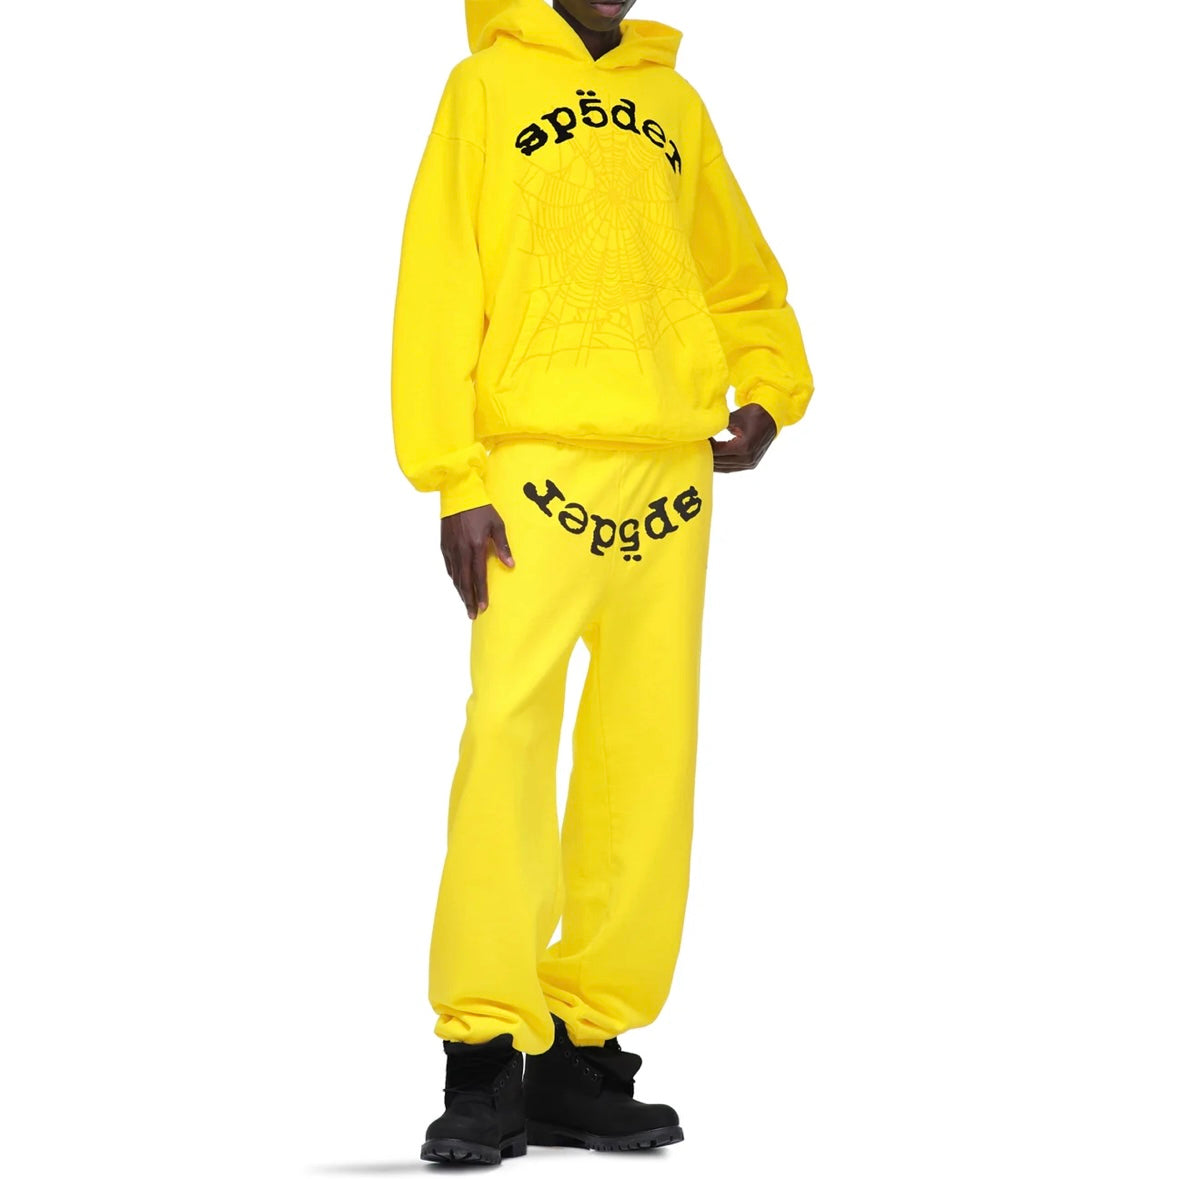 Sp5der Yellow Black Legacy Sweatpants On Body With Hoodie